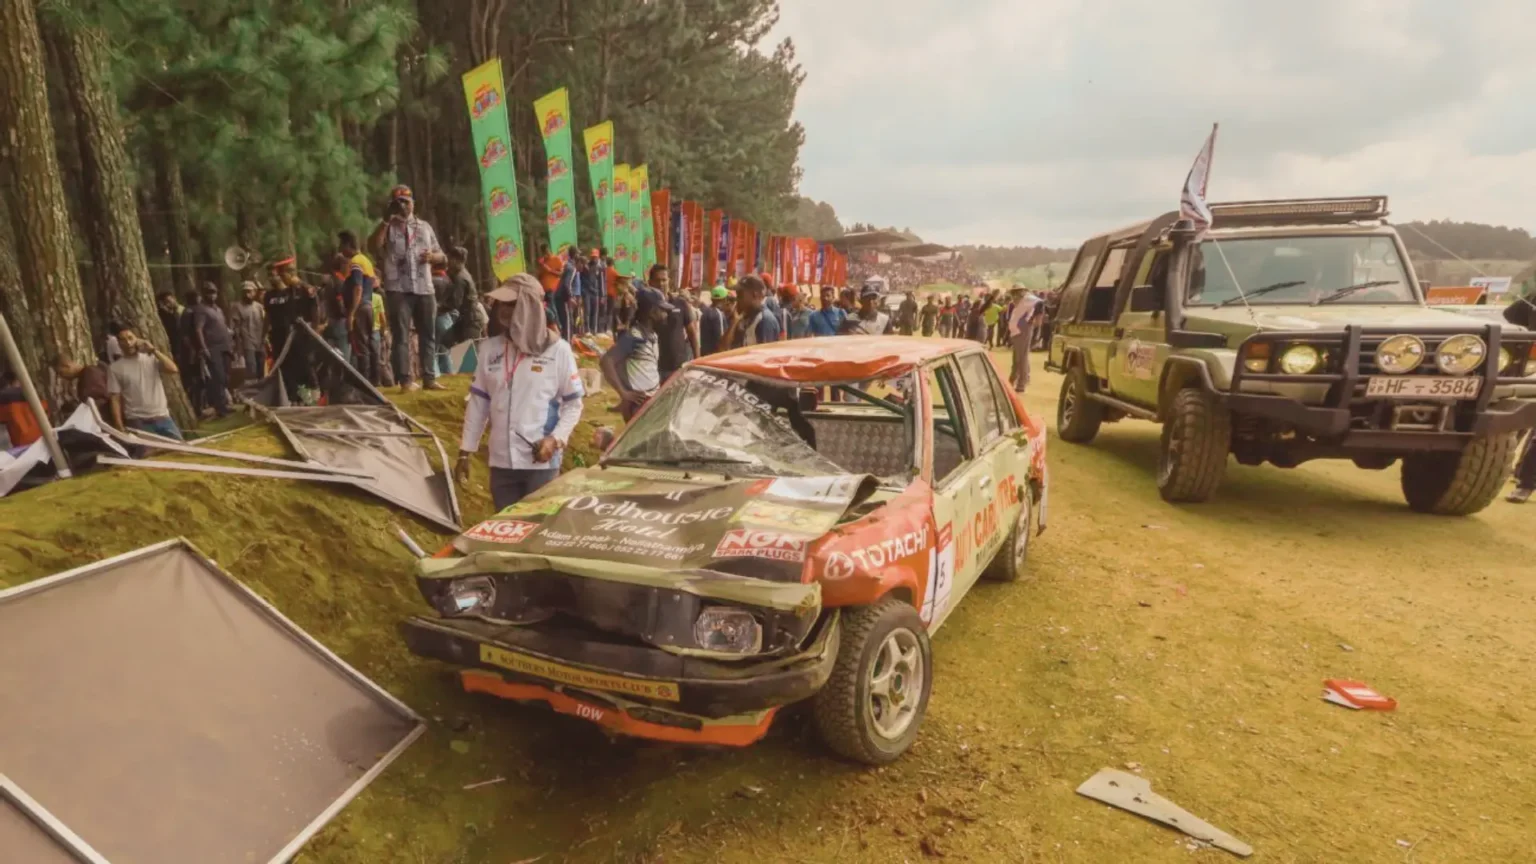 race-car-in-sri-lanka-rammed-into-a-crowd-killing-seven-and-injuring-20-spectators